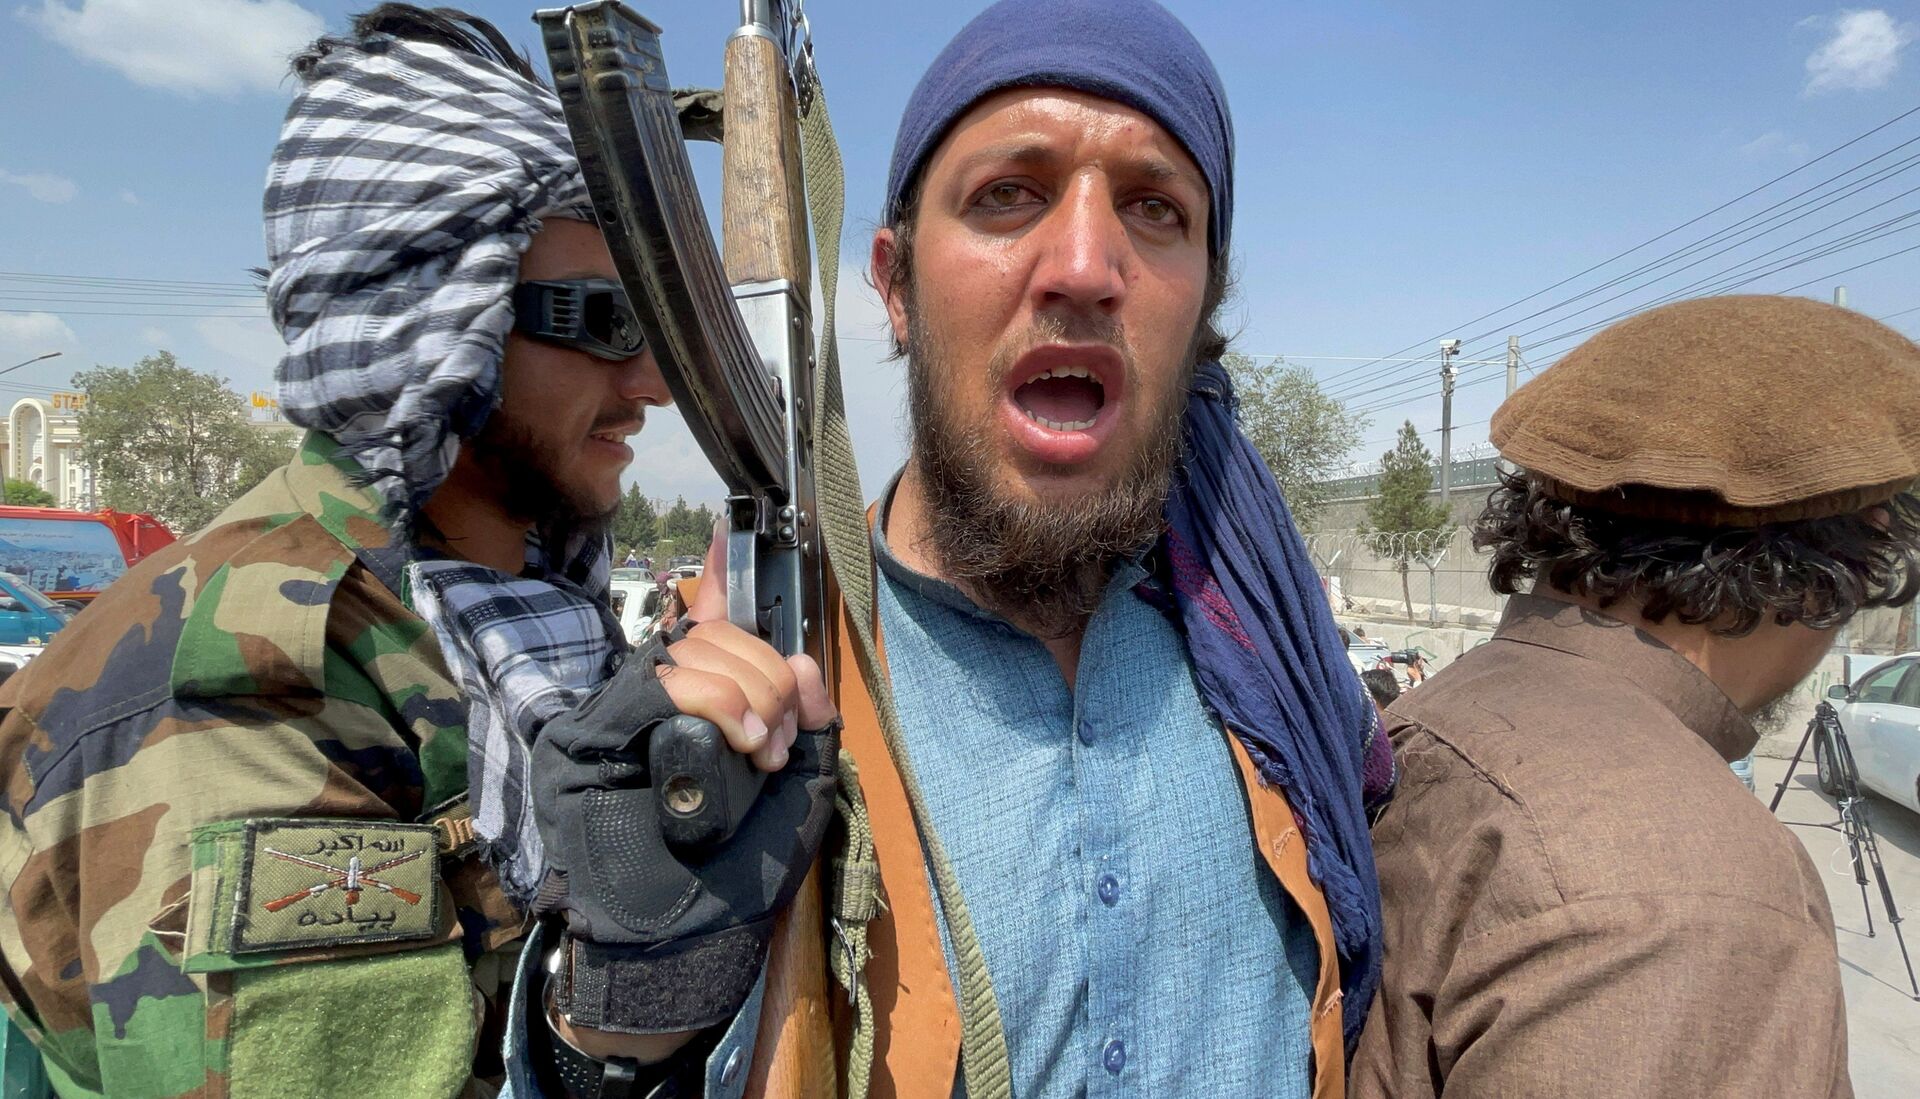 Taliban forces patrol near the entrance gate of Hamid Karzai International Airport, a day after U.S troops withdrawal, in Kabul - Sputnik International, 1920, 07.09.2021